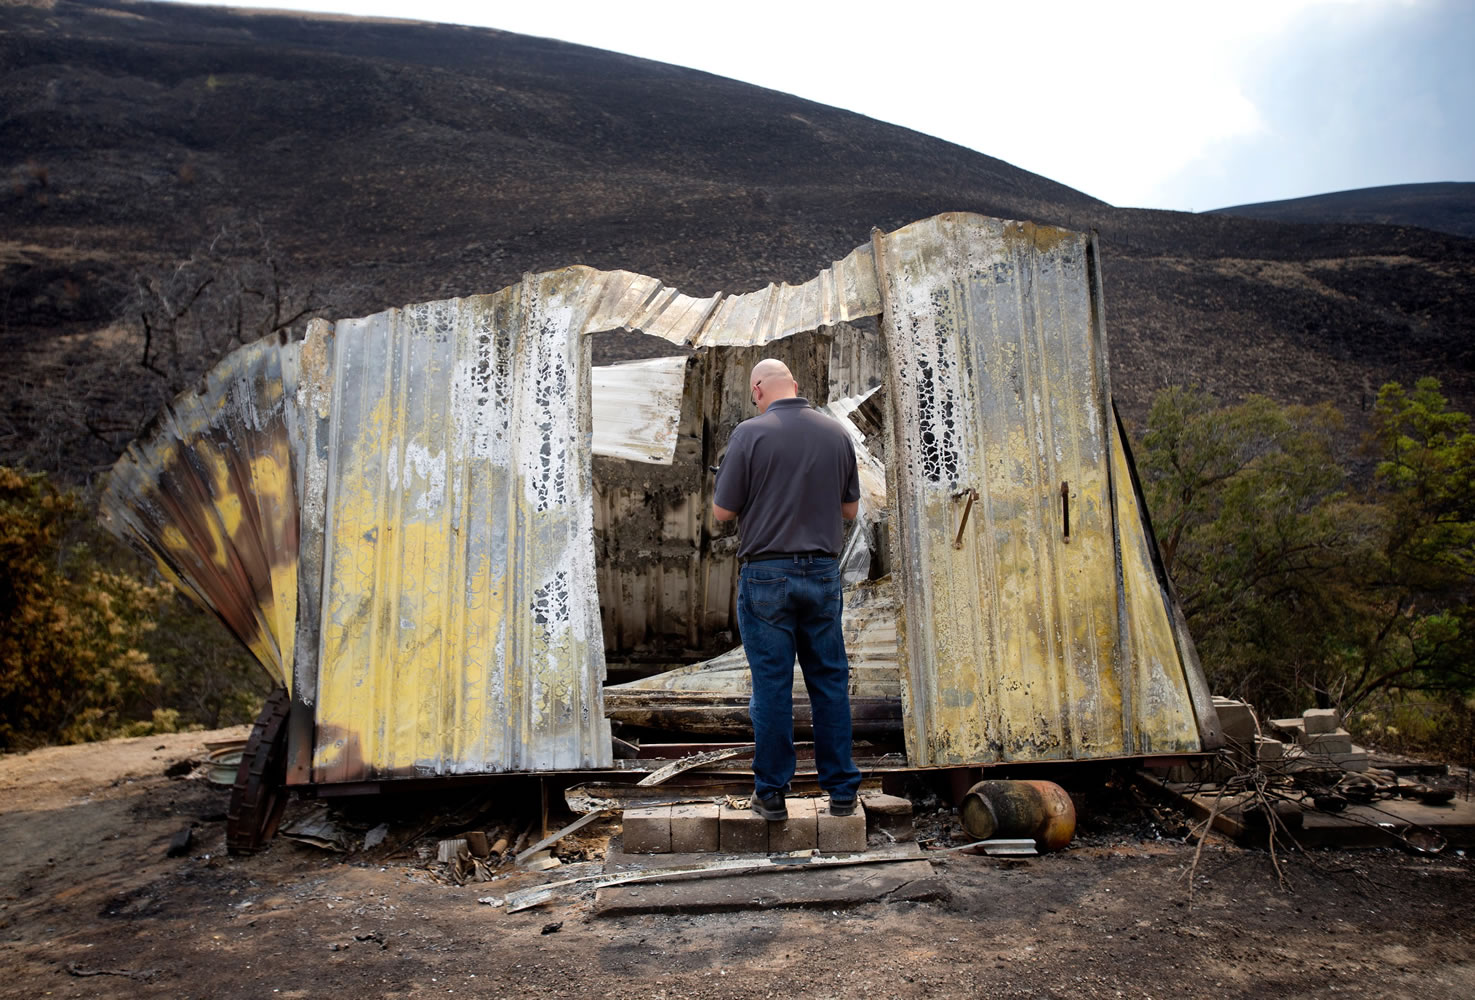 Insurance adjuster Eric Nieuwenhuis looks over the remnants of a small outbuilding that held antiques that was destroyed in the Colockum Tarps Fire near Don Keeley's home Wednesday south of Malaga.